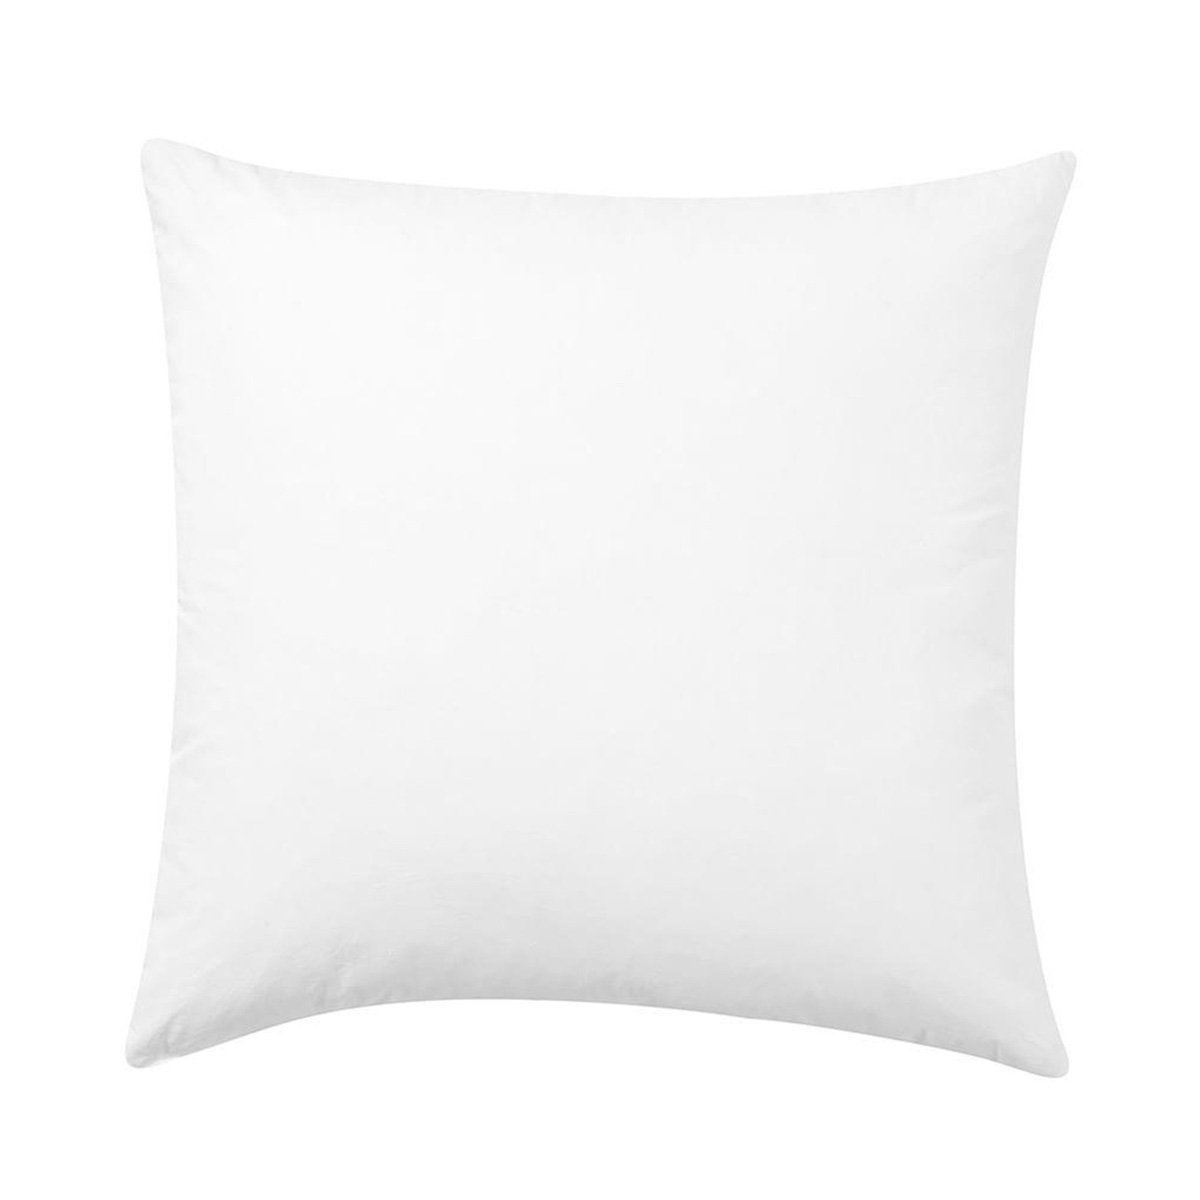 10/90 Down Feather Pillow Insert - Custom Pillow Inserts in Any